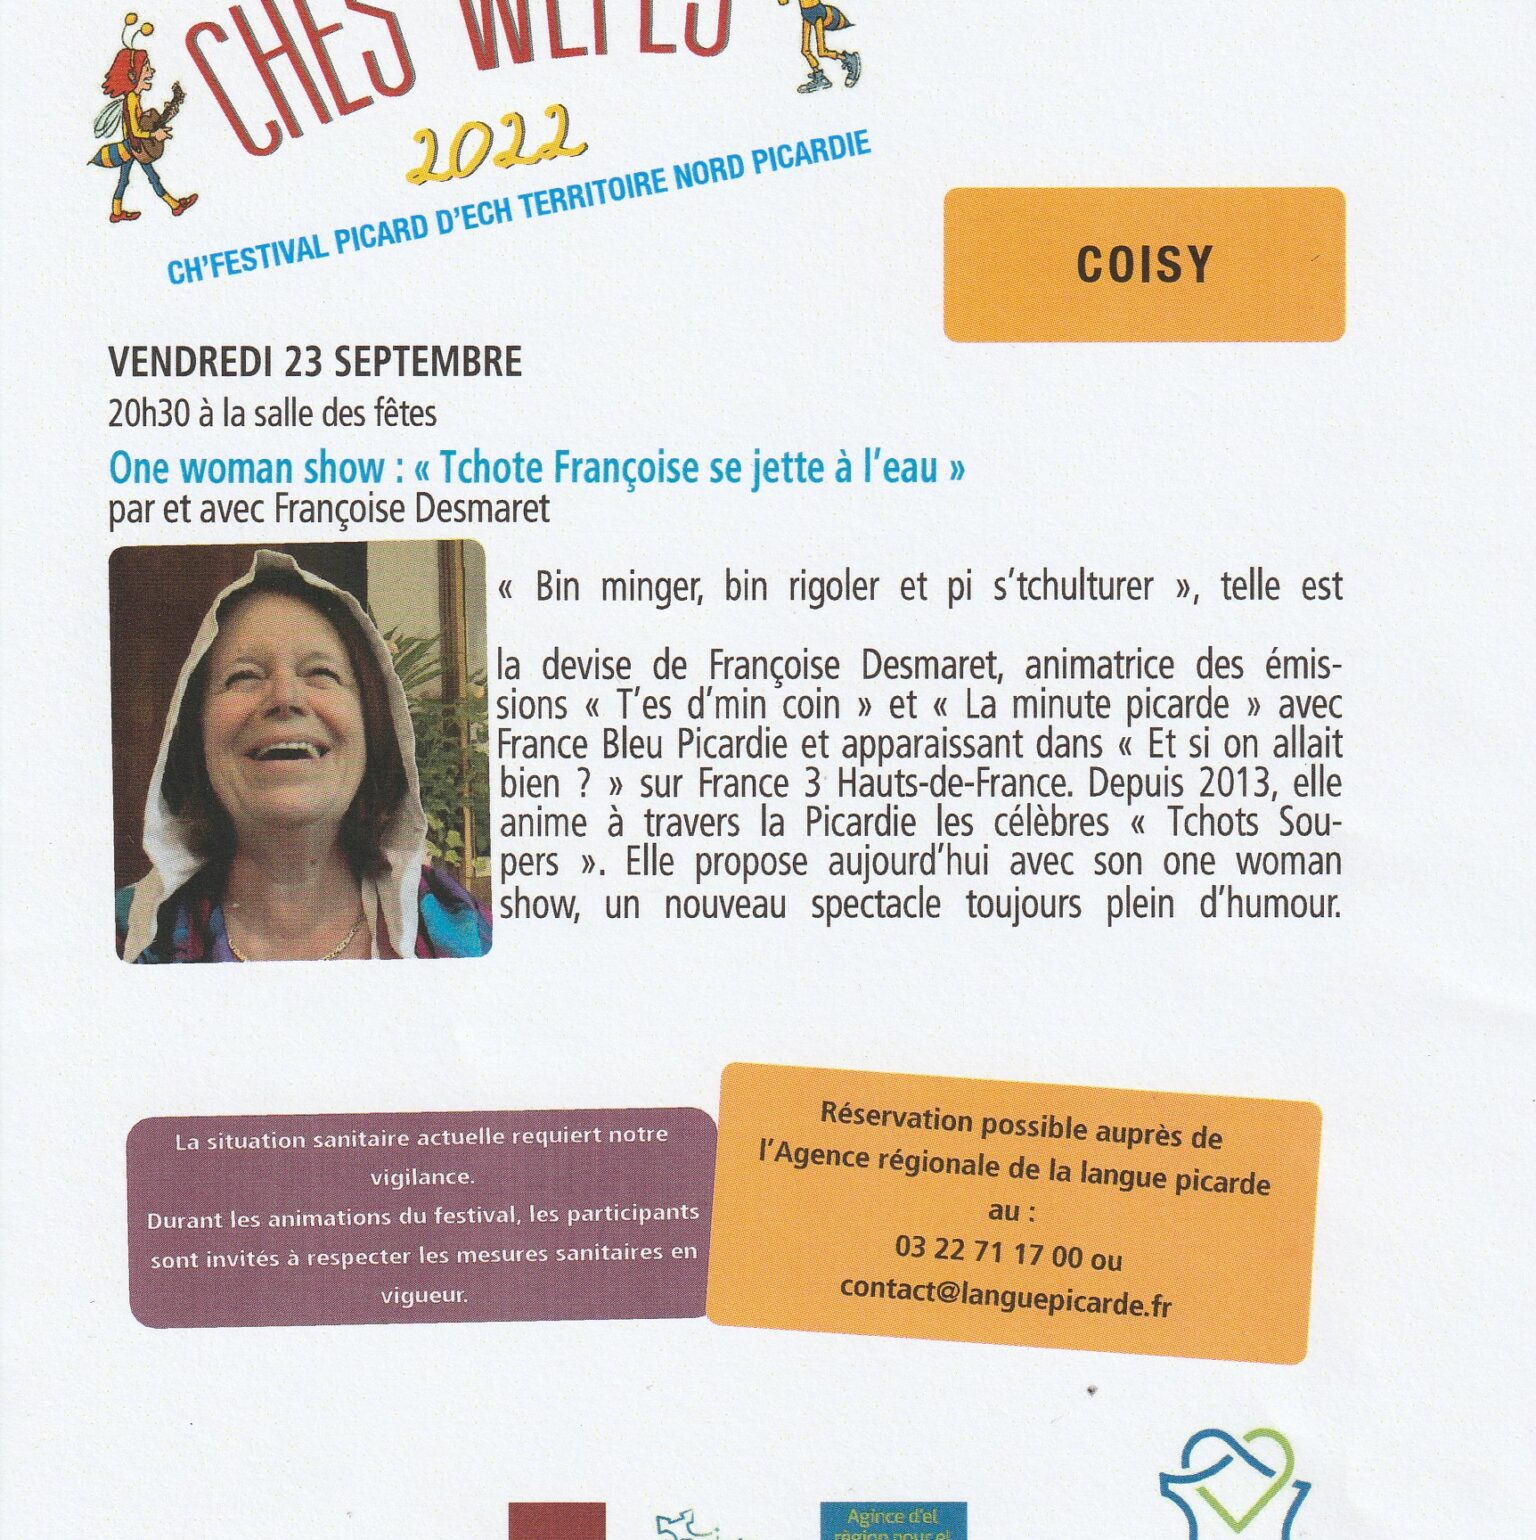 CHES WEPES – FESTIVAL PICARD – COISY 23 SEPTEMBRE 2022 A 20H30